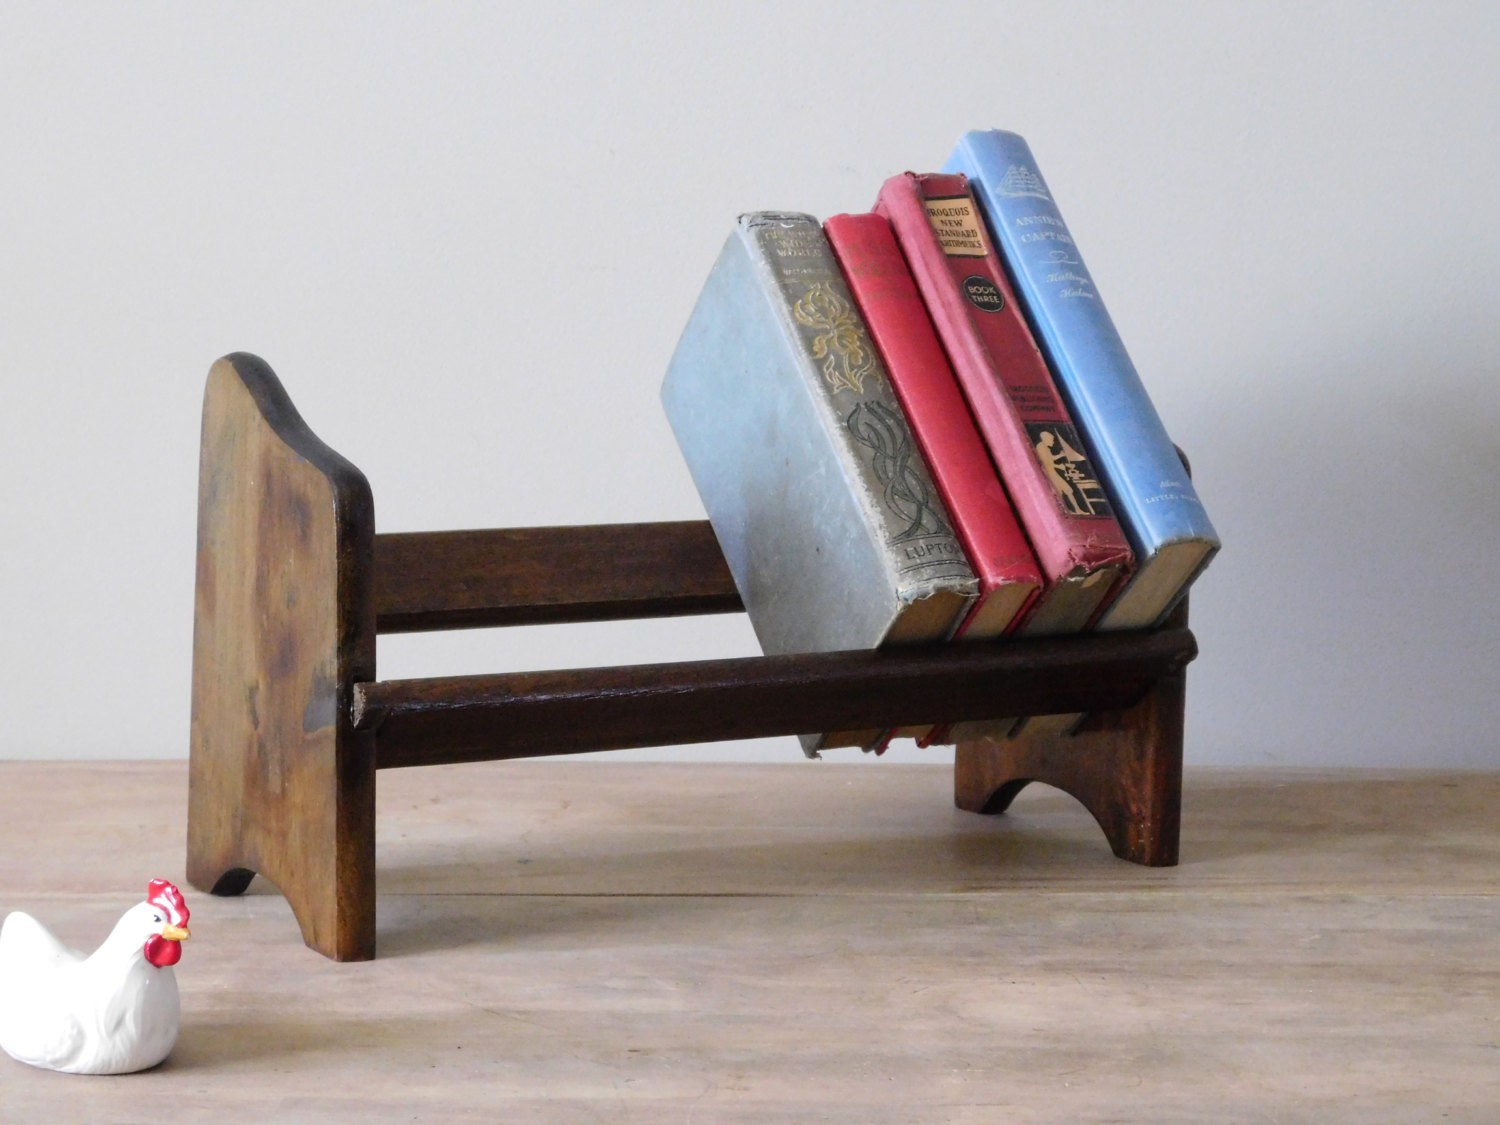 Reserved wooden table top book rack